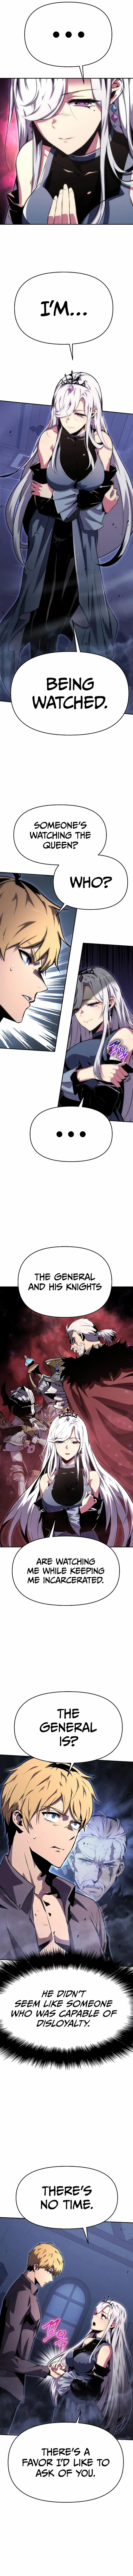 The Knight King Who Returned With A God - Page 3